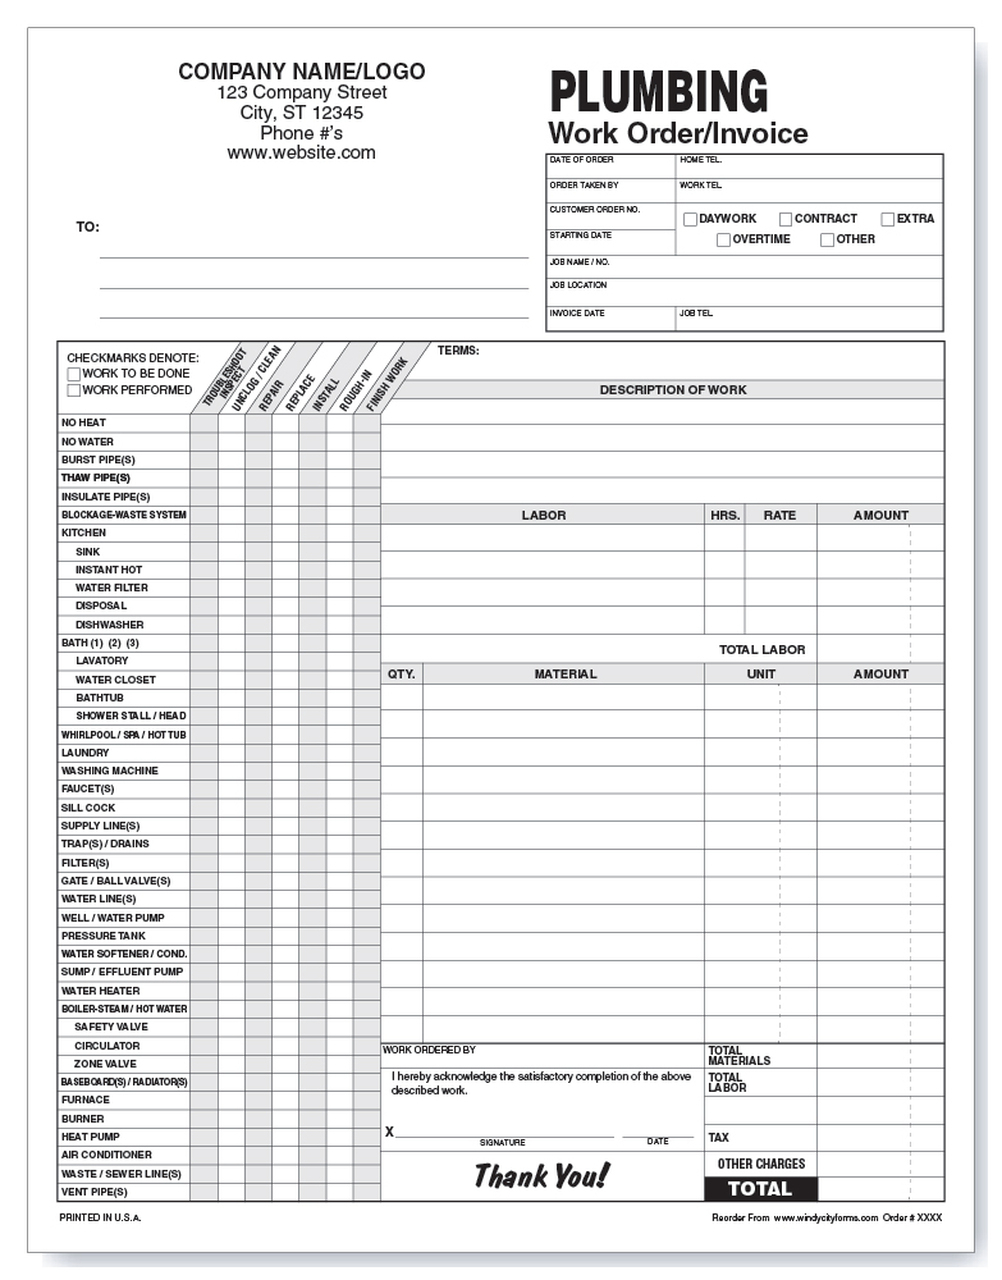 plumbing work order template - Kesal Pertaining To Plumbing Checklist Template Intended For Plumbing Checklist Template